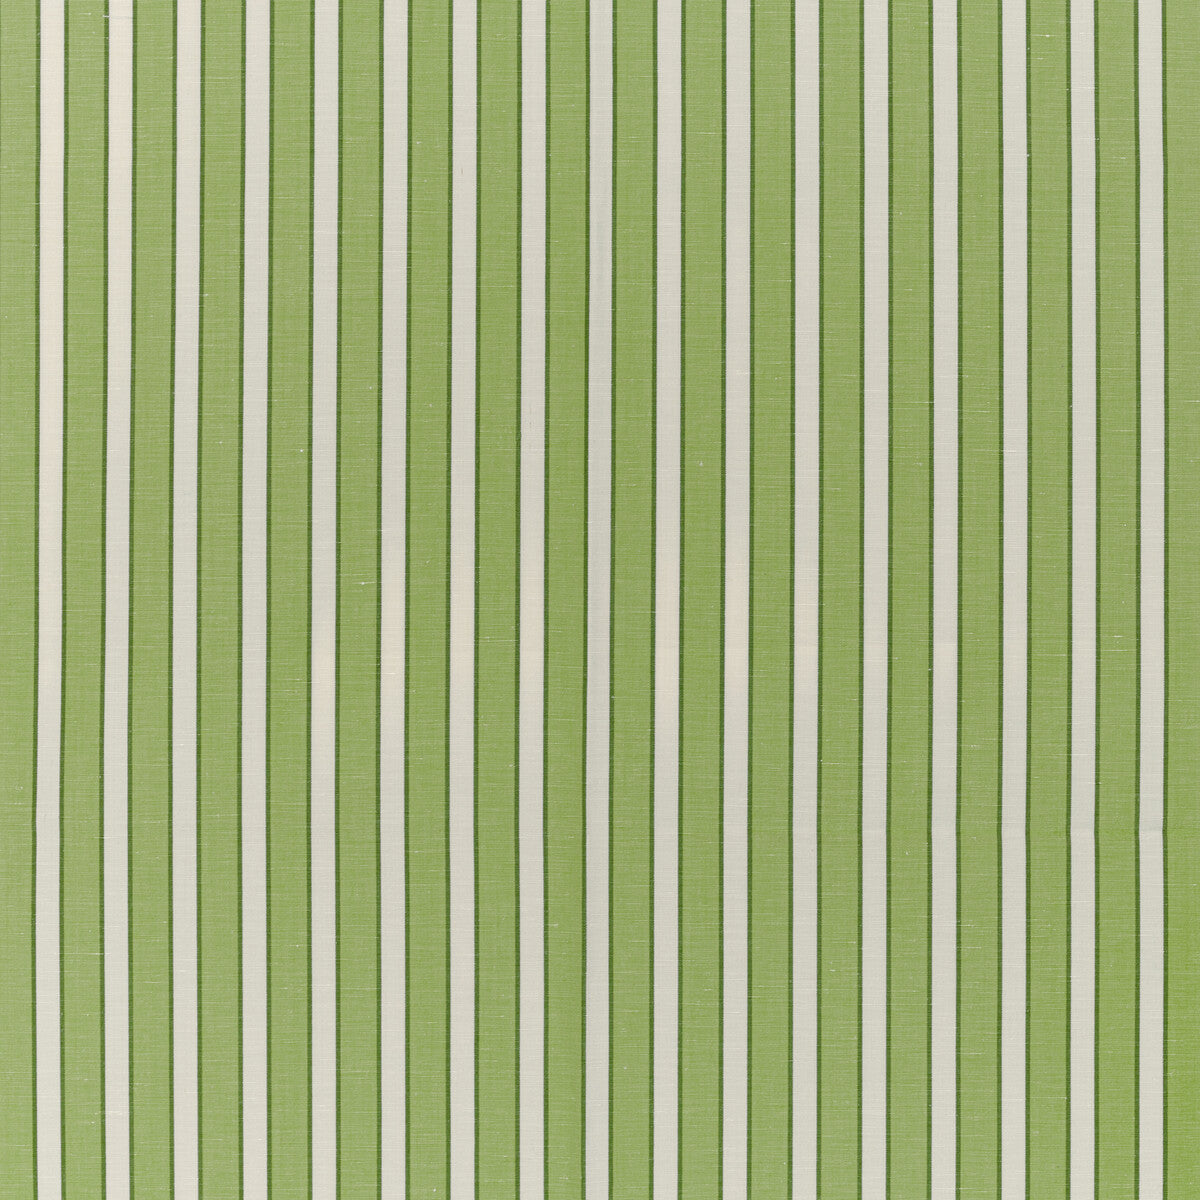 Rouen Stripe fabric in green color - pattern 8022117.33.0 - by Brunschwig &amp; Fils in the Normant Checks And Stripes II collection